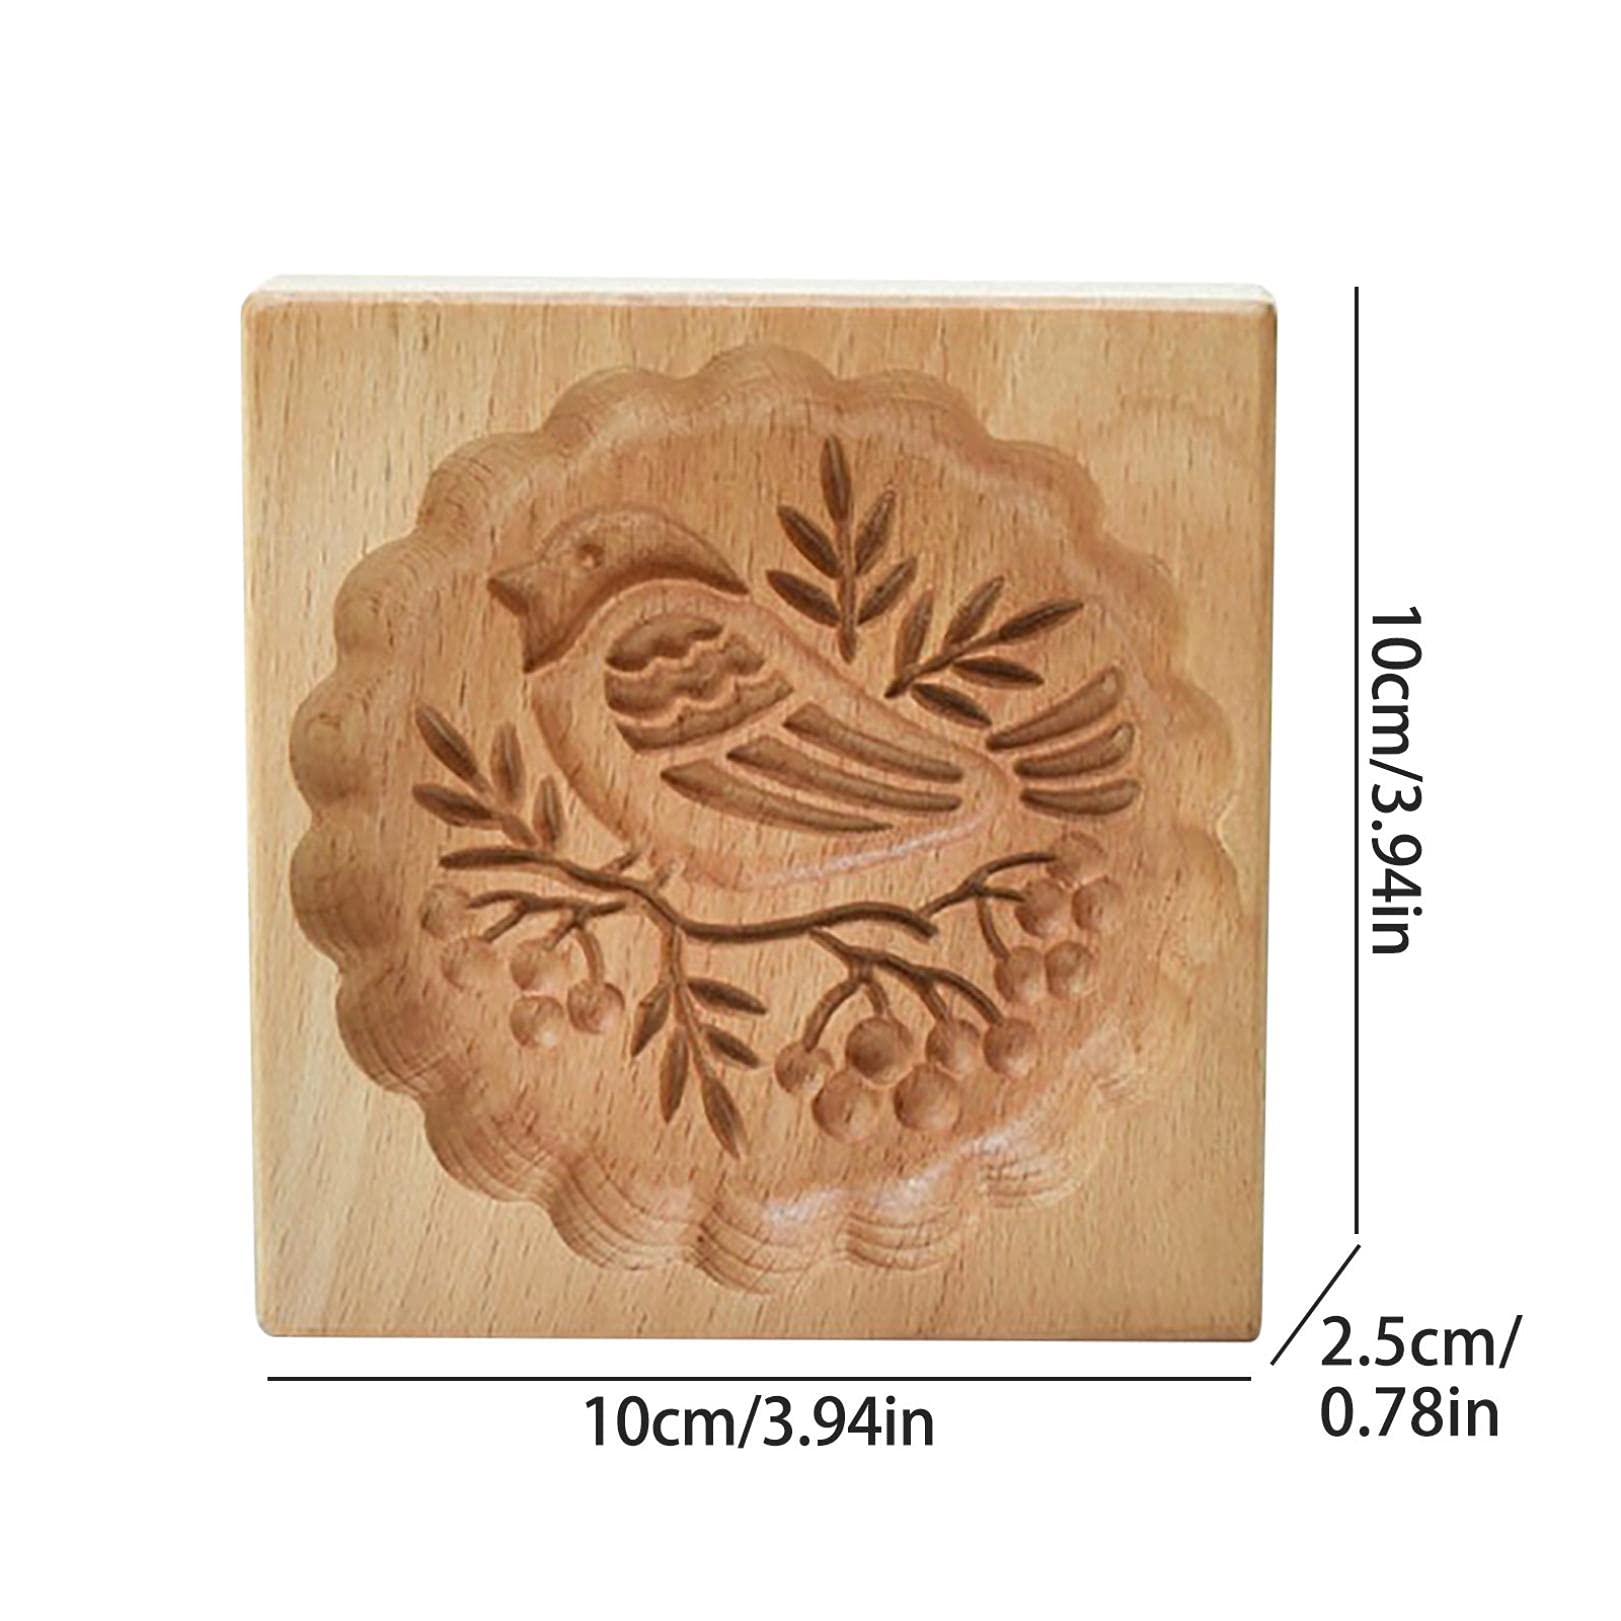 ROTORS Wooden Animal Cookie Molds,Press Type Cookie Cutter With 3D Hen, Bird,Rabbit,Fish Design,Wood Biscuit Molds With Good Wishes for Baking (Bird)